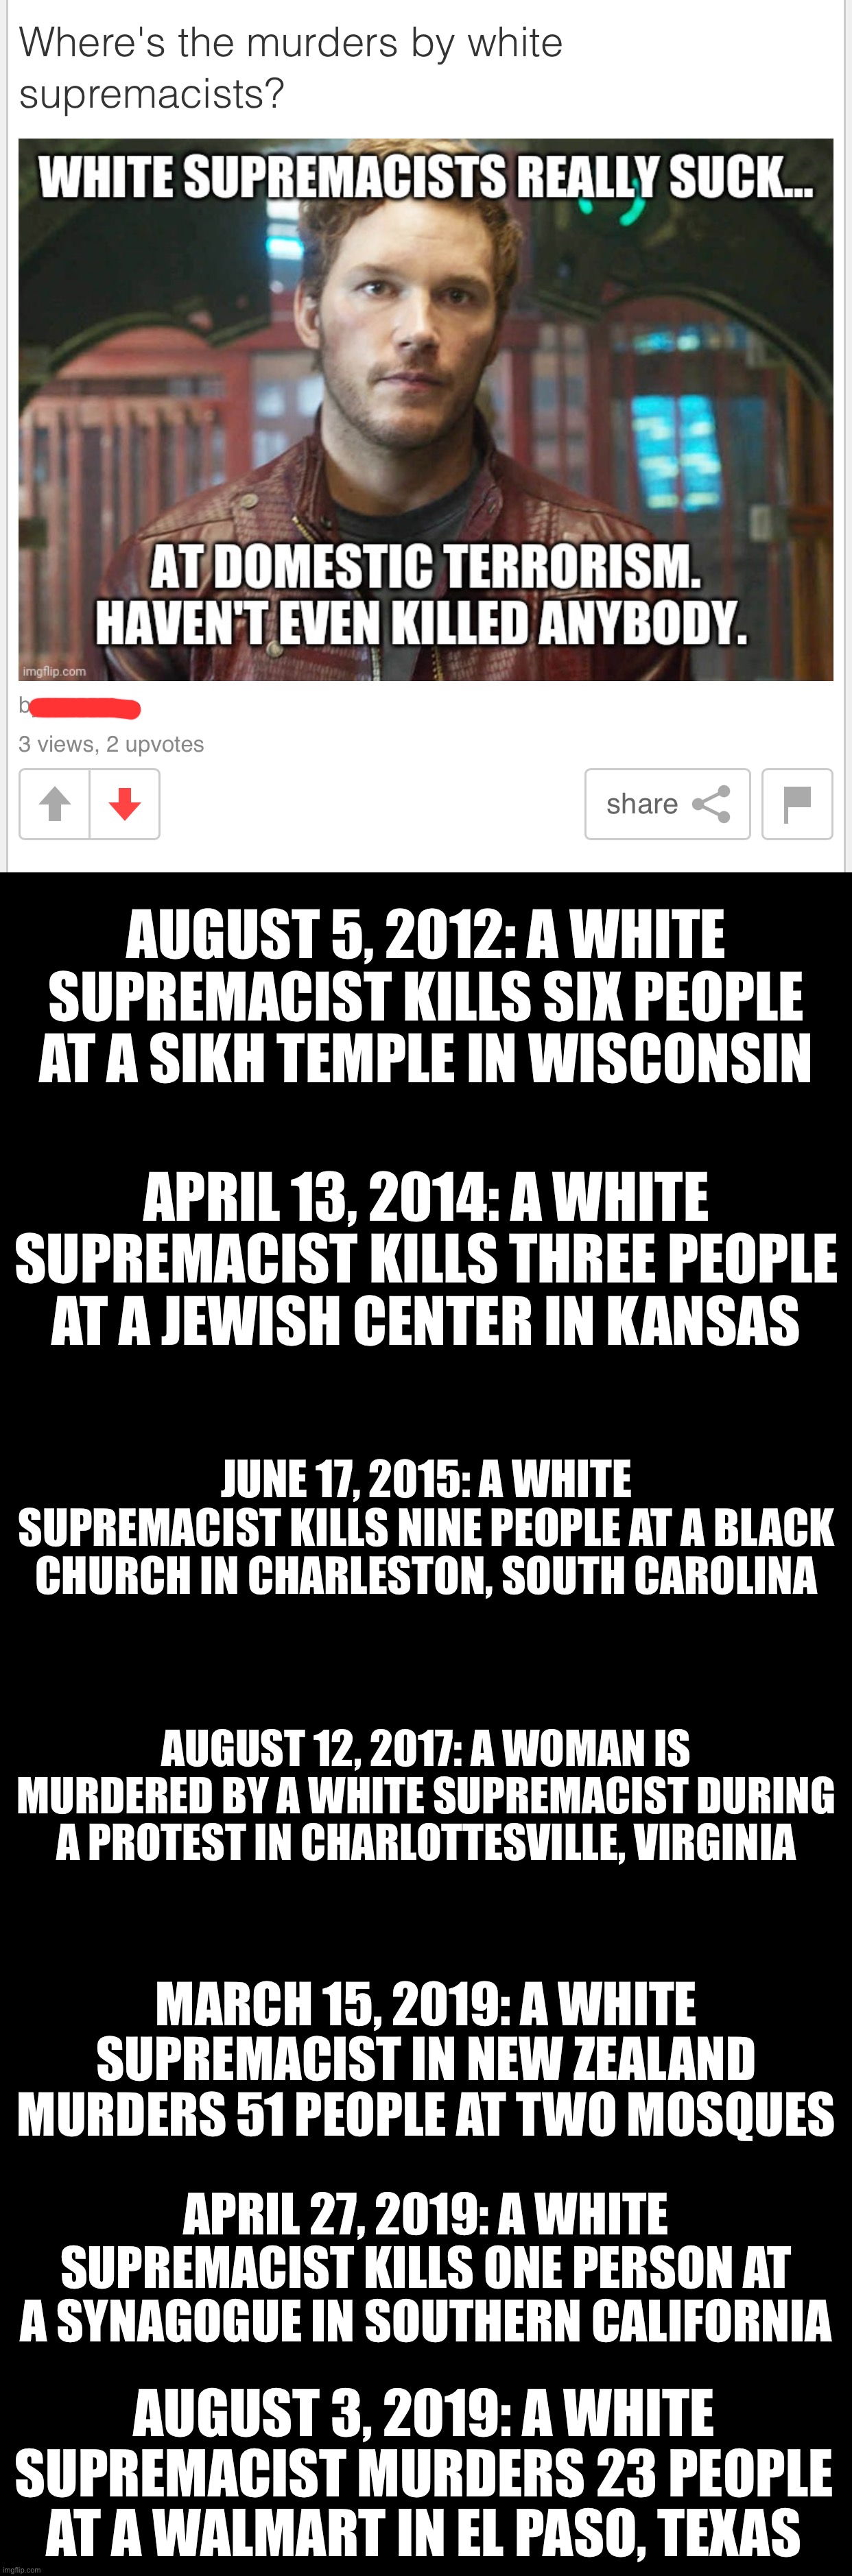 AUGUST 5, 2012: A WHITE SUPREMACIST KILLS SIX PEOPLE AT A SIKH TEMPLE IN WISCONSIN; APRIL 13, 2014: A WHITE SUPREMACIST KILLS THREE PEOPLE AT A JEWISH CENTER IN KANSAS; JUNE 17, 2015: A WHITE SUPREMACIST KILLS NINE PEOPLE AT A BLACK CHURCH IN CHARLESTON, SOUTH CAROLINA; AUGUST 12, 2017: A WOMAN IS MURDERED BY A WHITE SUPREMACIST DURING A PROTEST IN CHARLOTTESVILLE, VIRGINIA; MARCH 15, 2019: A WHITE SUPREMACIST IN NEW ZEALAND MURDERS 51 PEOPLE AT TWO MOSQUES; APRIL 27, 2019: A WHITE SUPREMACIST KILLS ONE PERSON AT A SYNAGOGUE IN SOUTHERN CALIFORNIA; AUGUST 3, 2019: A WHITE SUPREMACIST MURDERS 23 PEOPLE AT A WALMART IN EL PASO, TEXAS | image tagged in black square | made w/ Imgflip meme maker